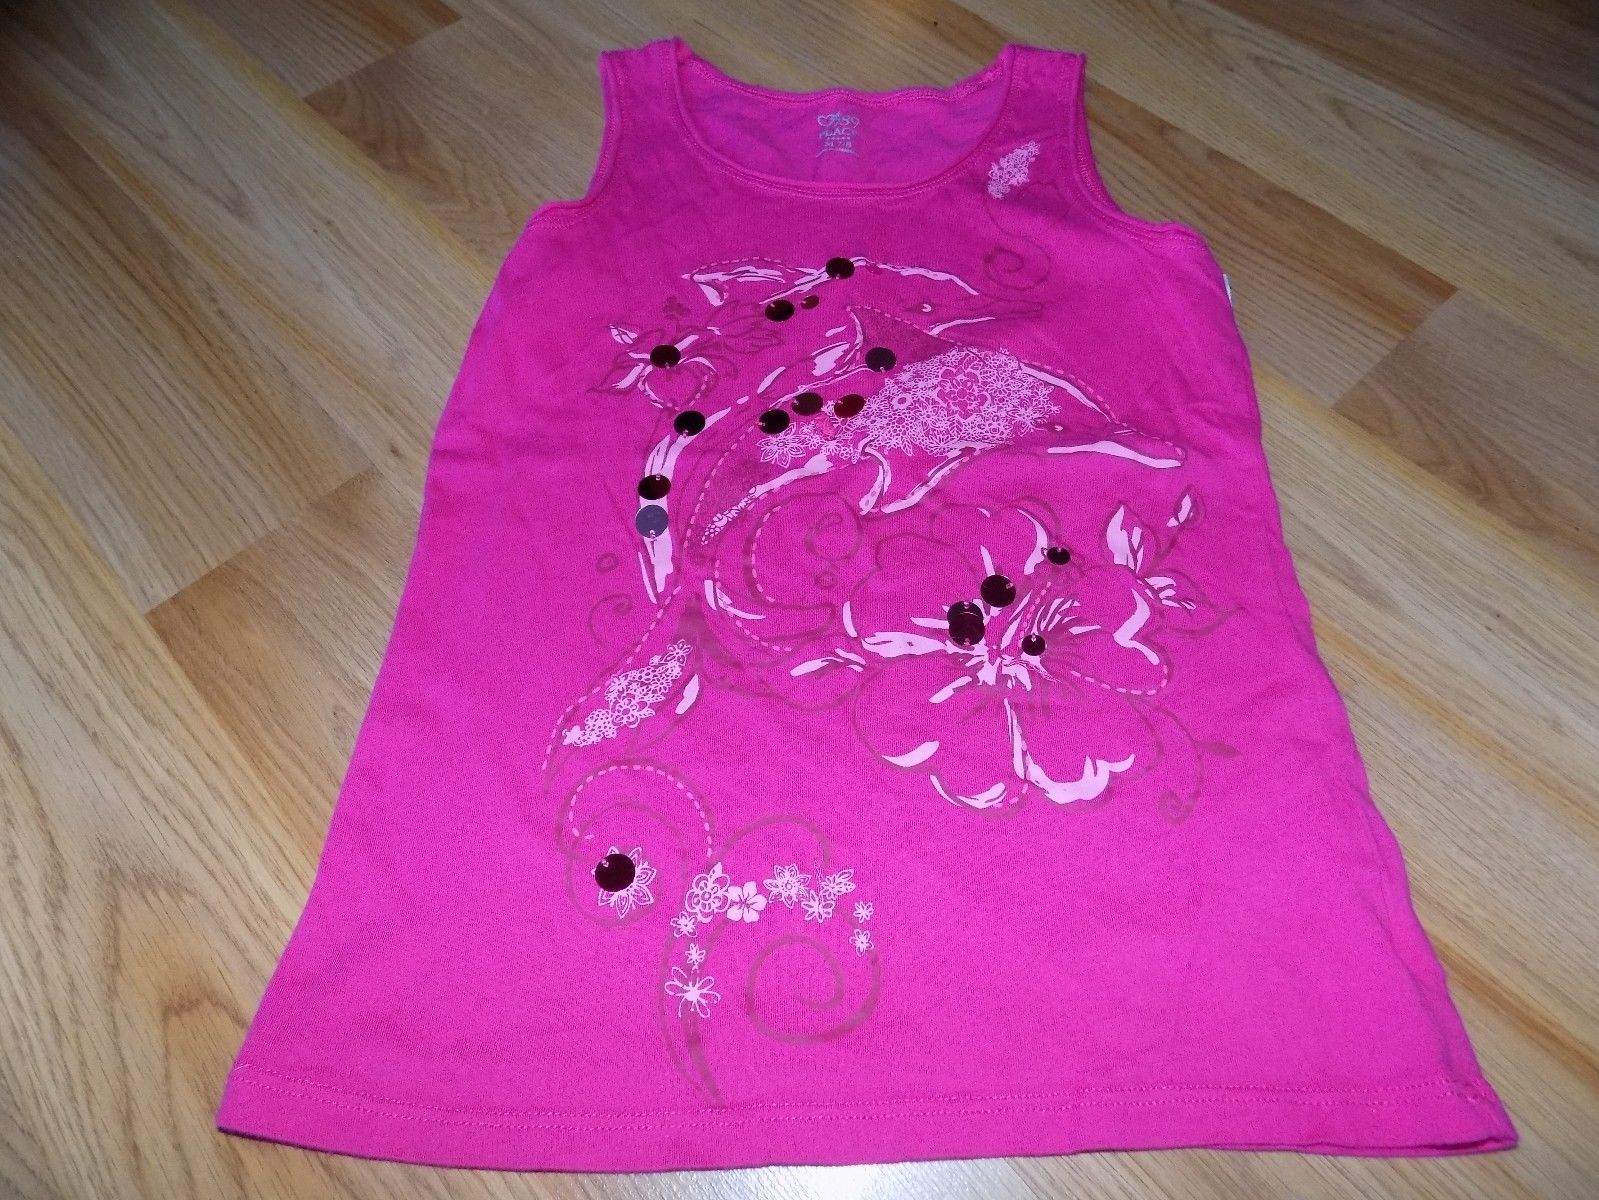 Girl's Size Medium 7-8 The Children's Place Pink Dolphin Floral Tank Top EUC - $12.00